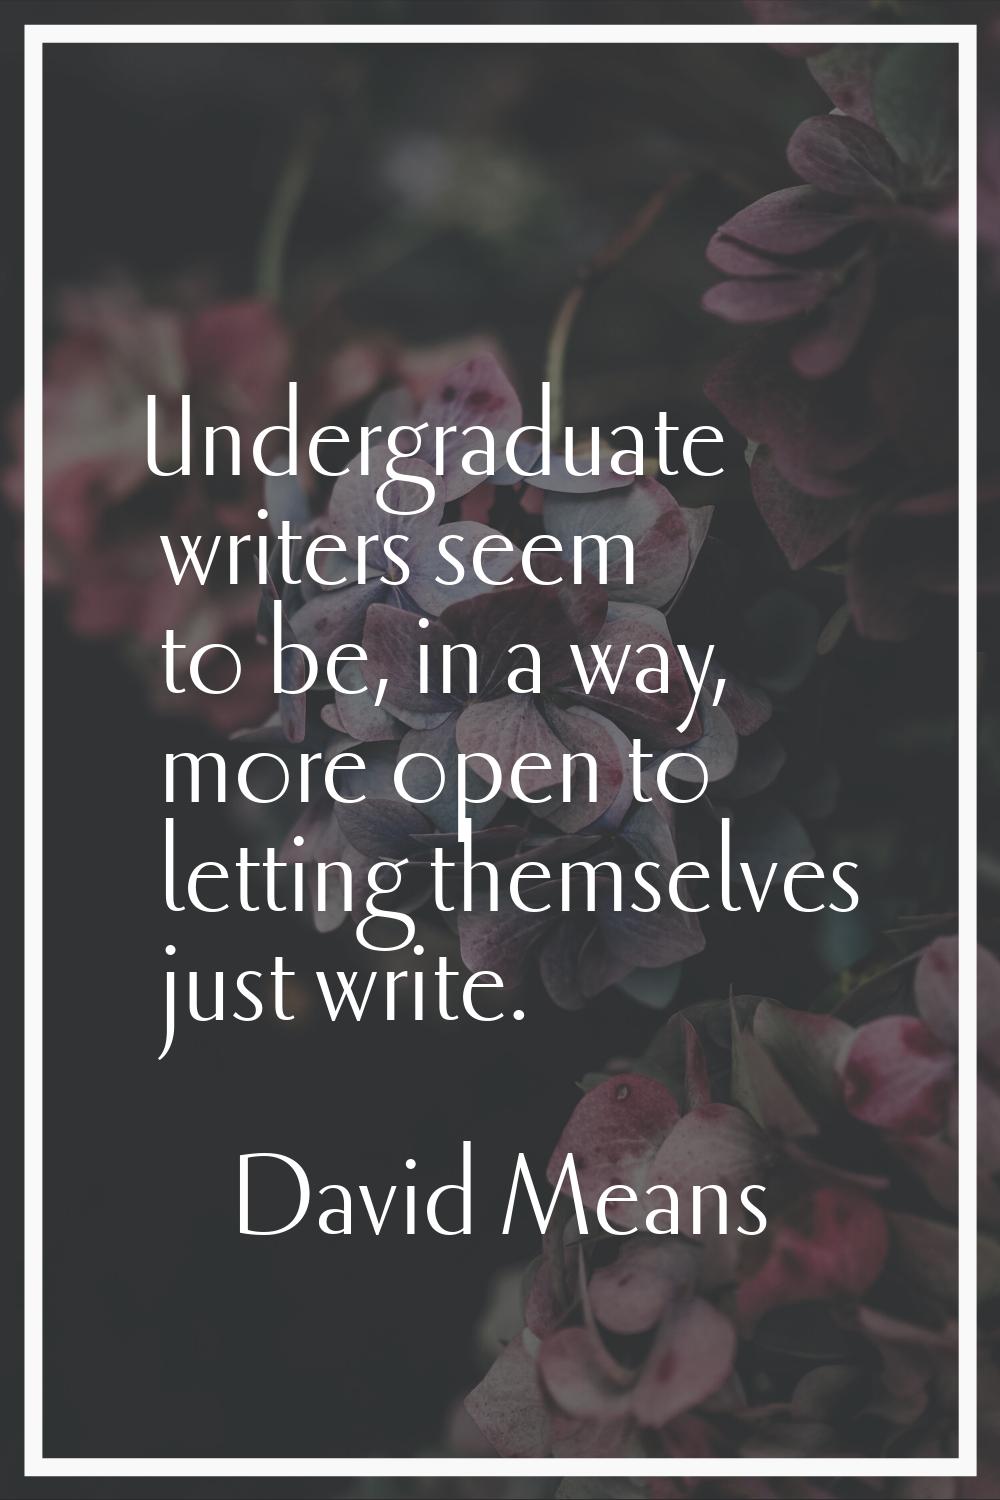 Undergraduate writers seem to be, in a way, more open to letting themselves just write.